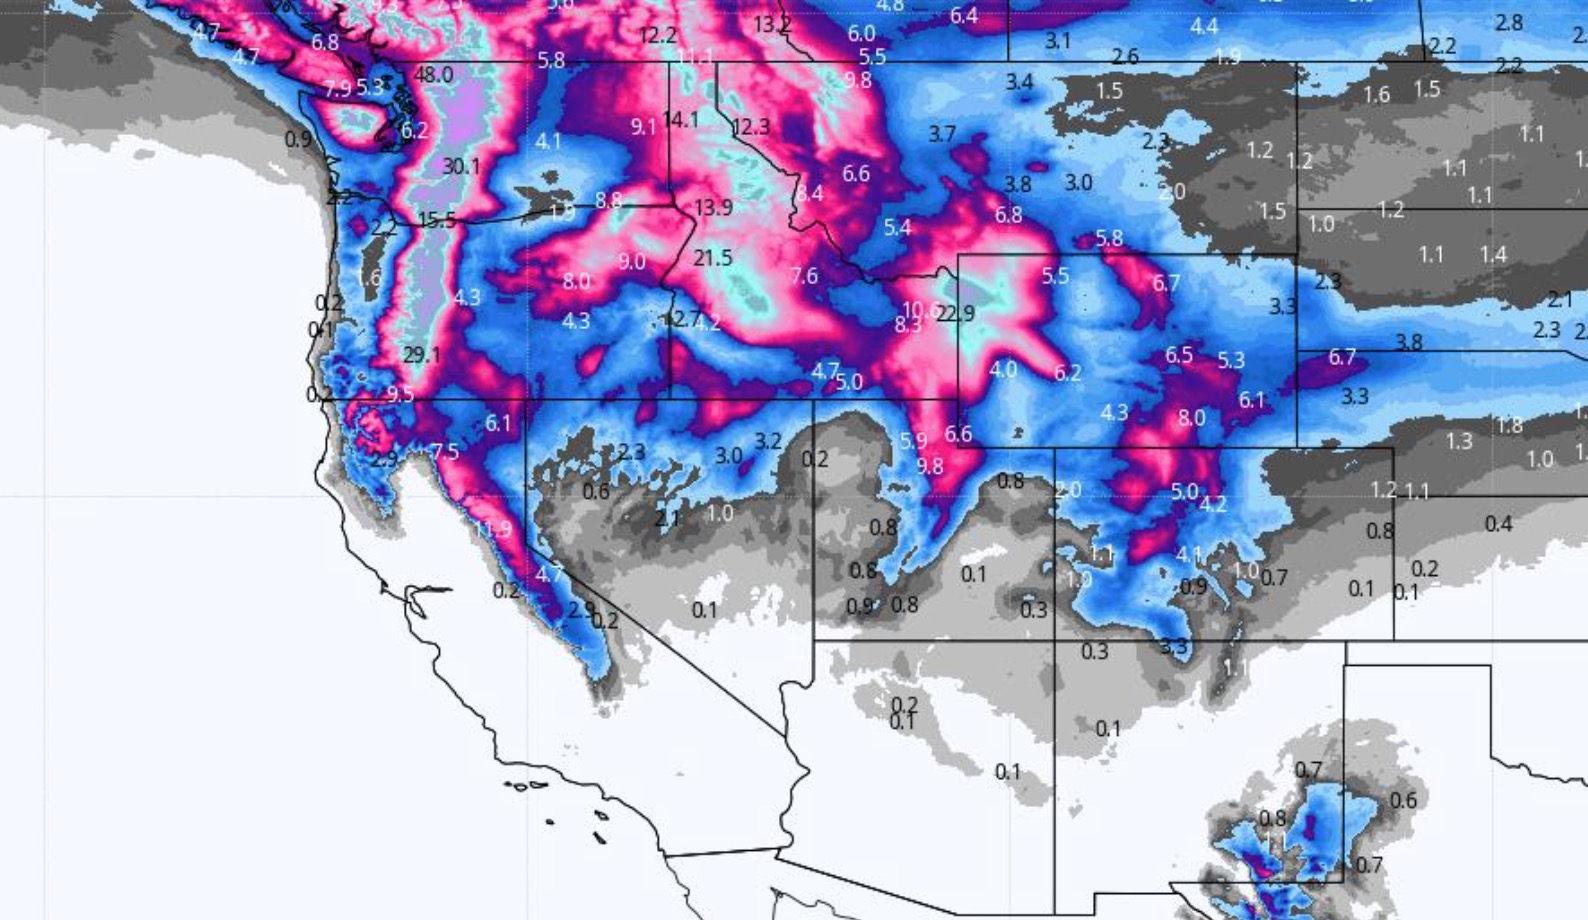 WINTER RETURNS! THREE STORMS THIS WEEK FOR THE WEST